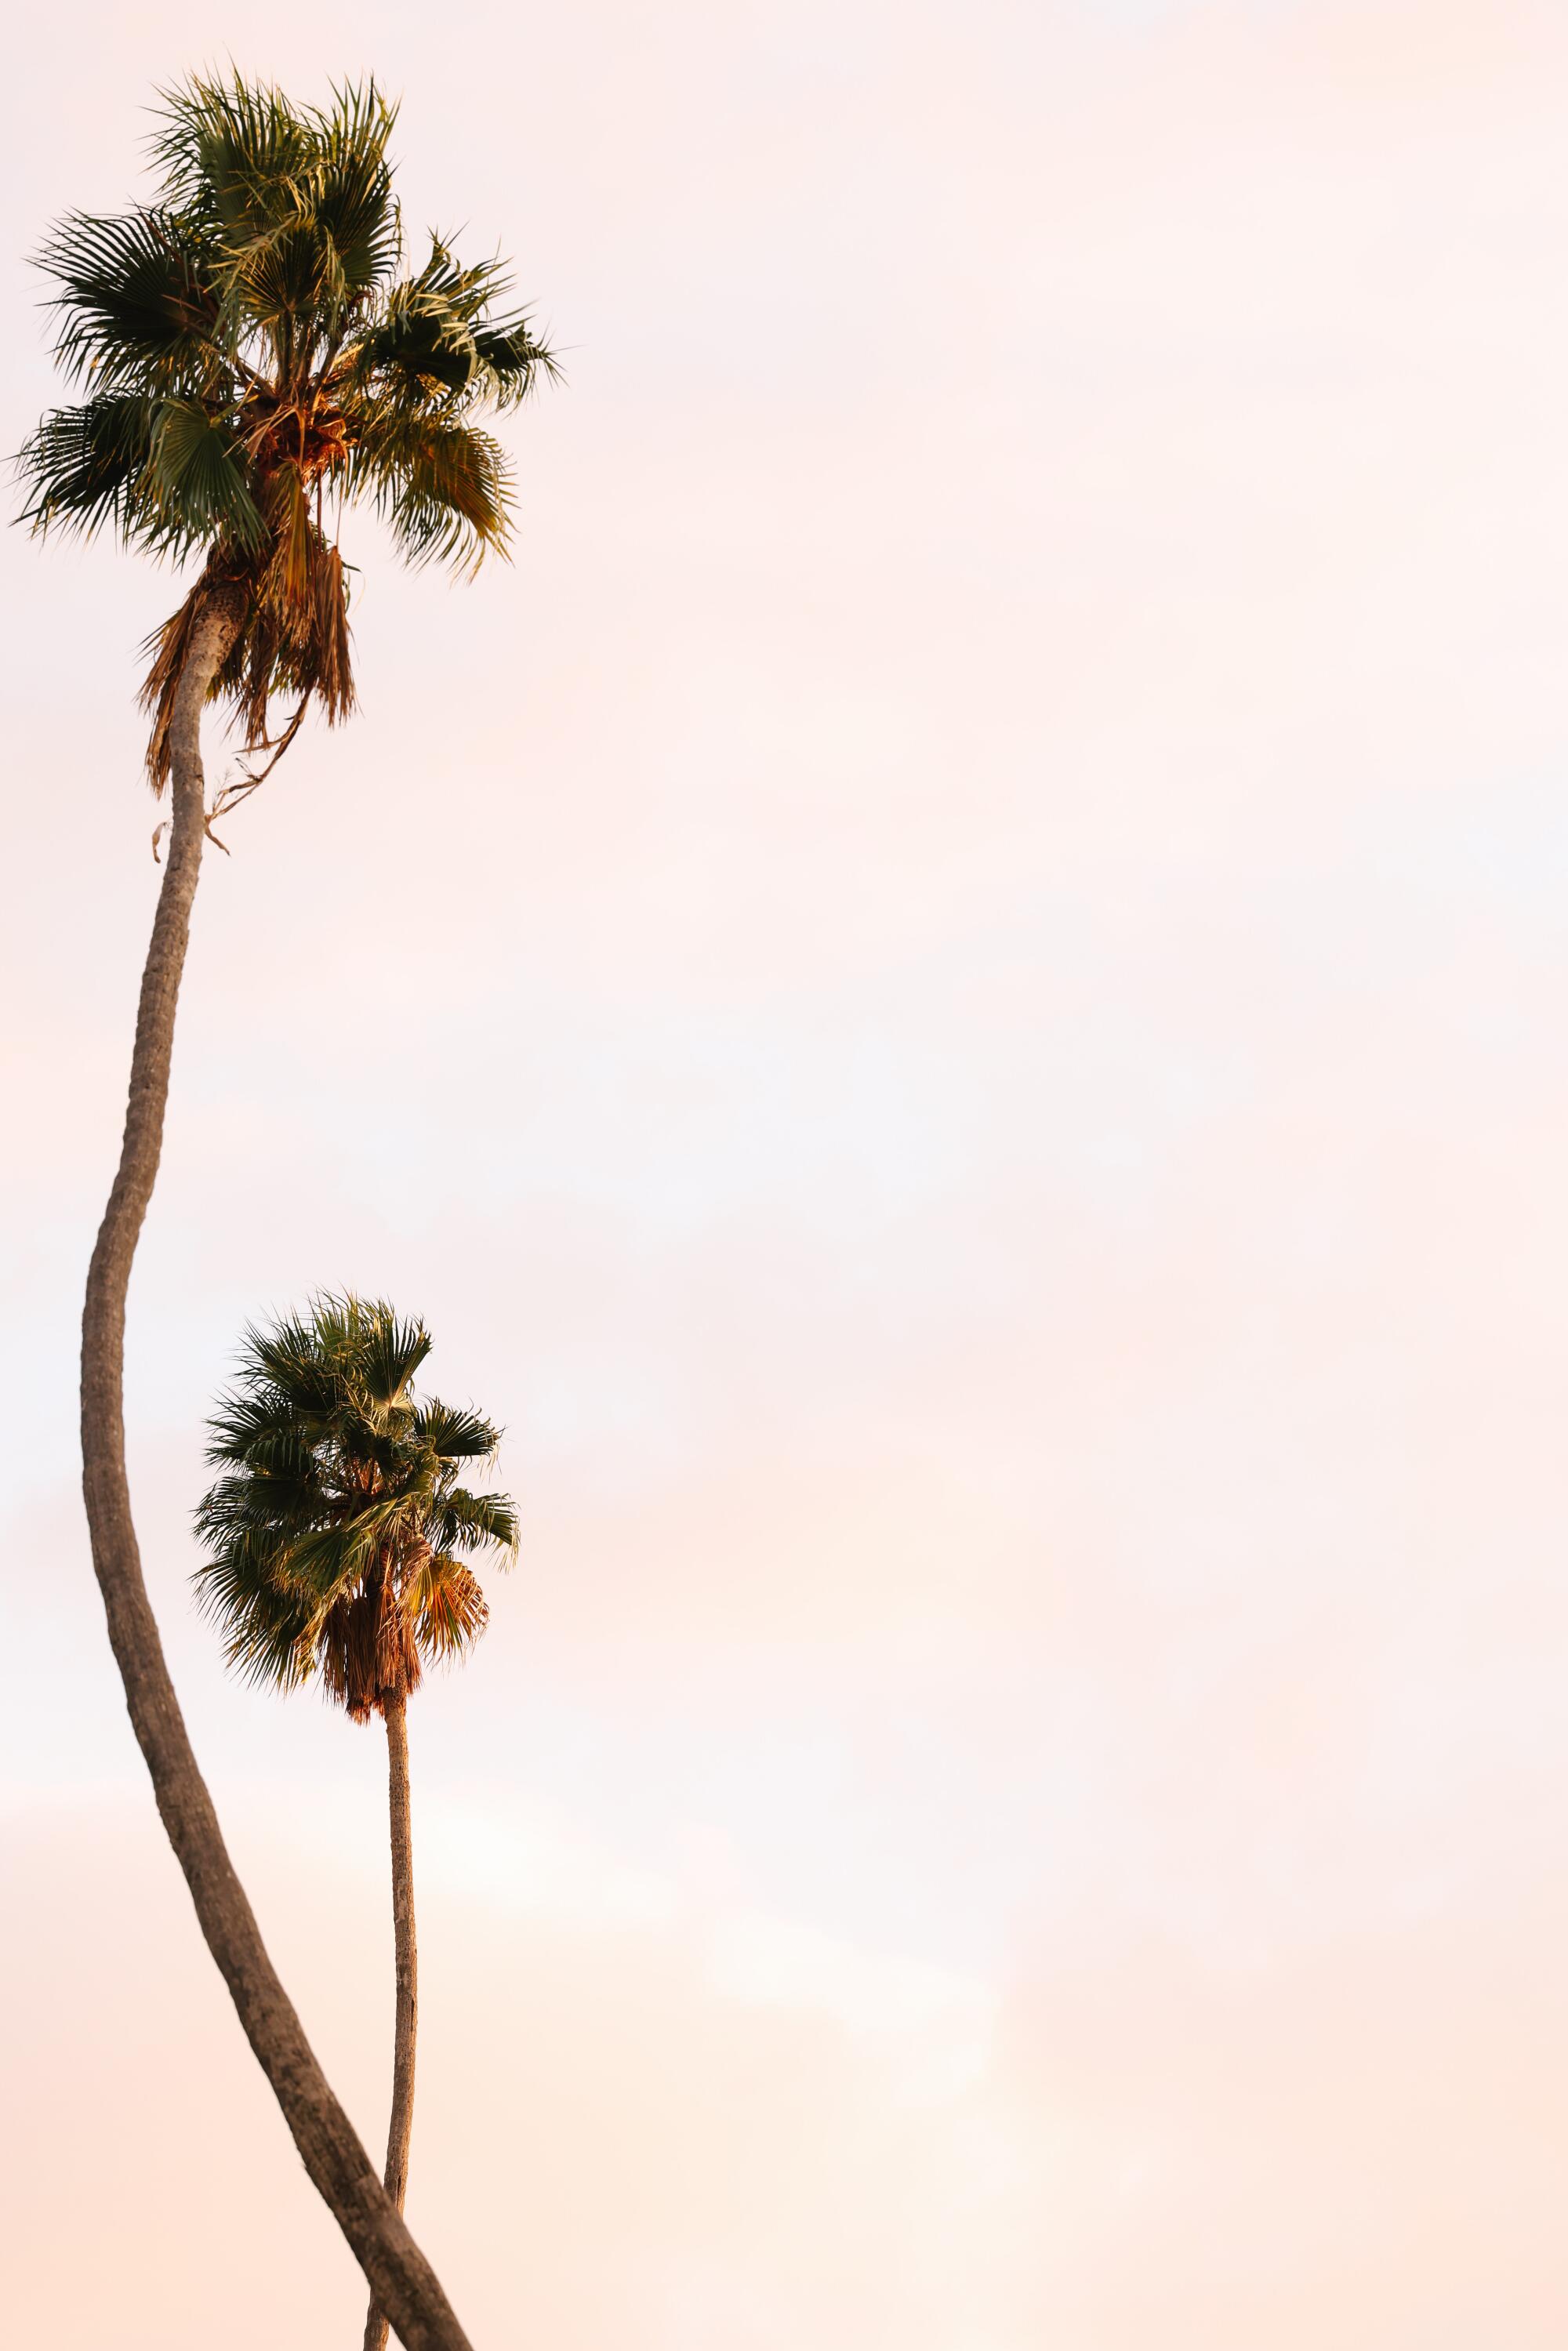 Two palm trees with skinny branches stretch into a peach sky. 